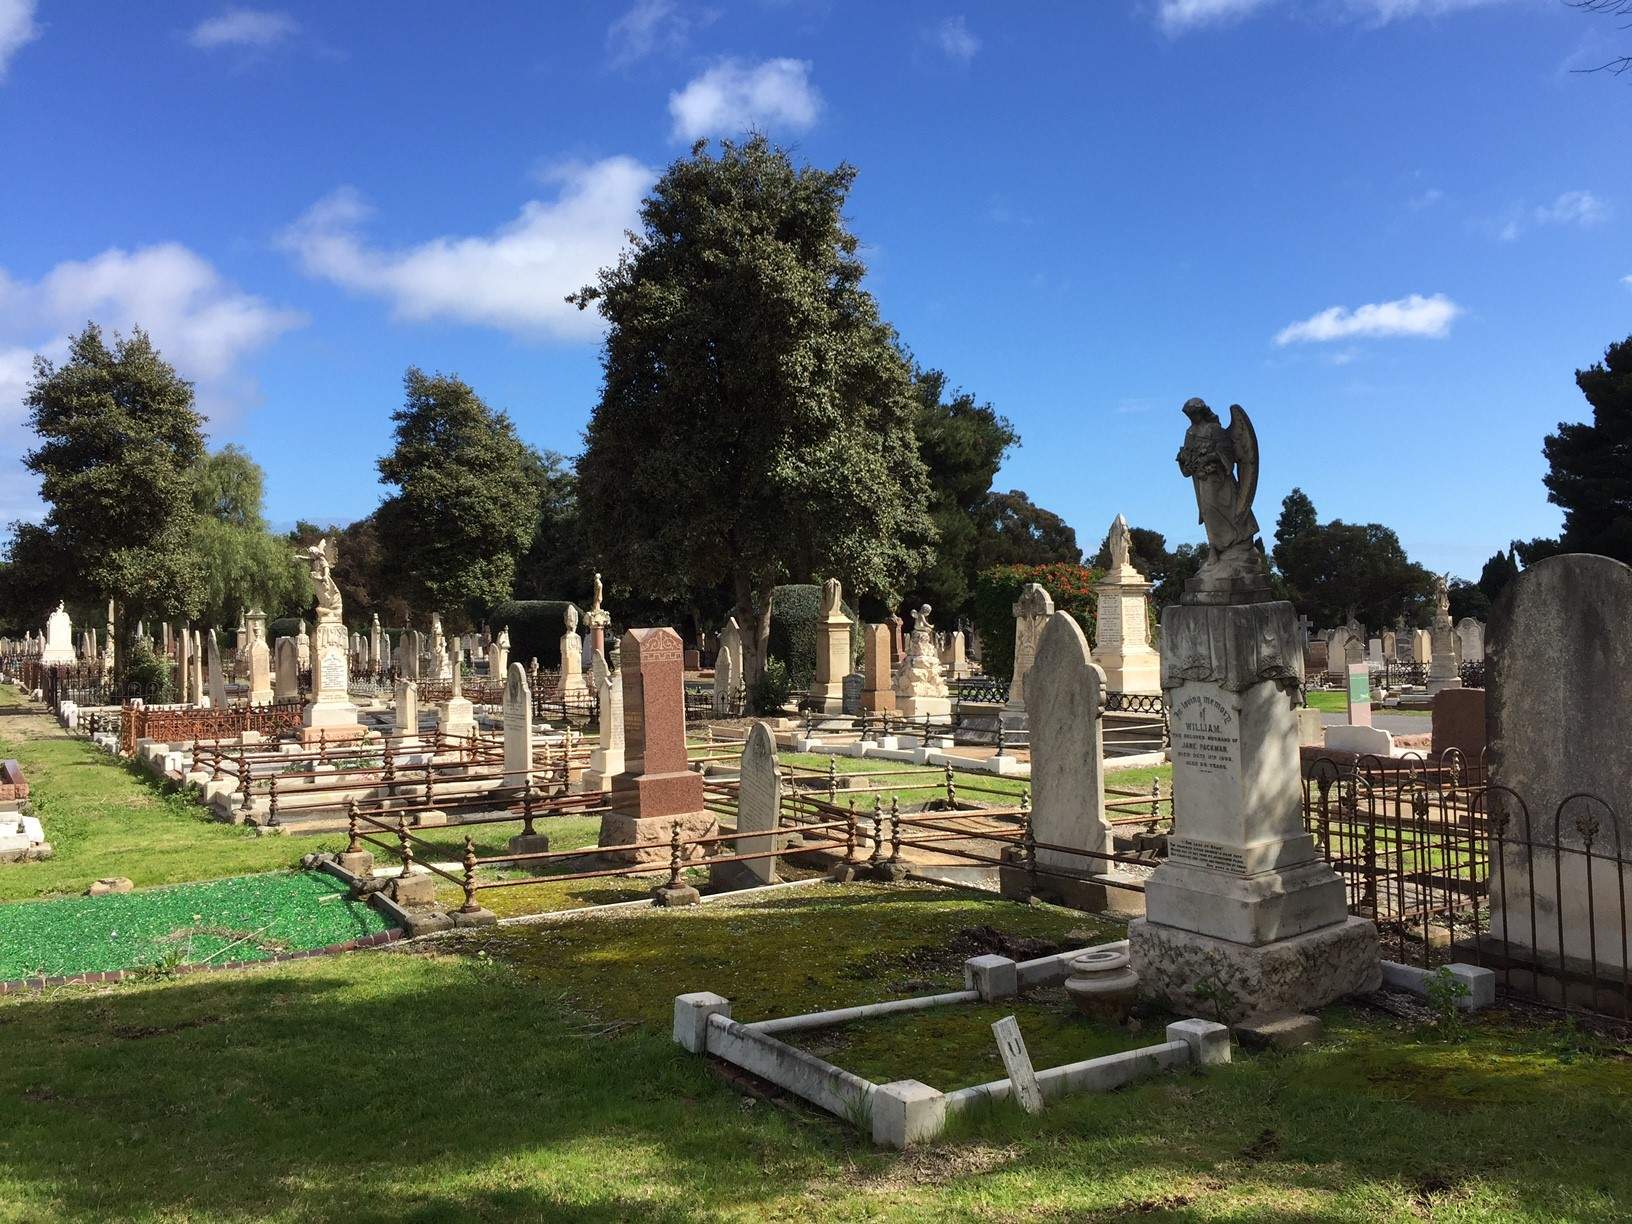 A sunny day at West Terrace Cemetery in Adelaide.